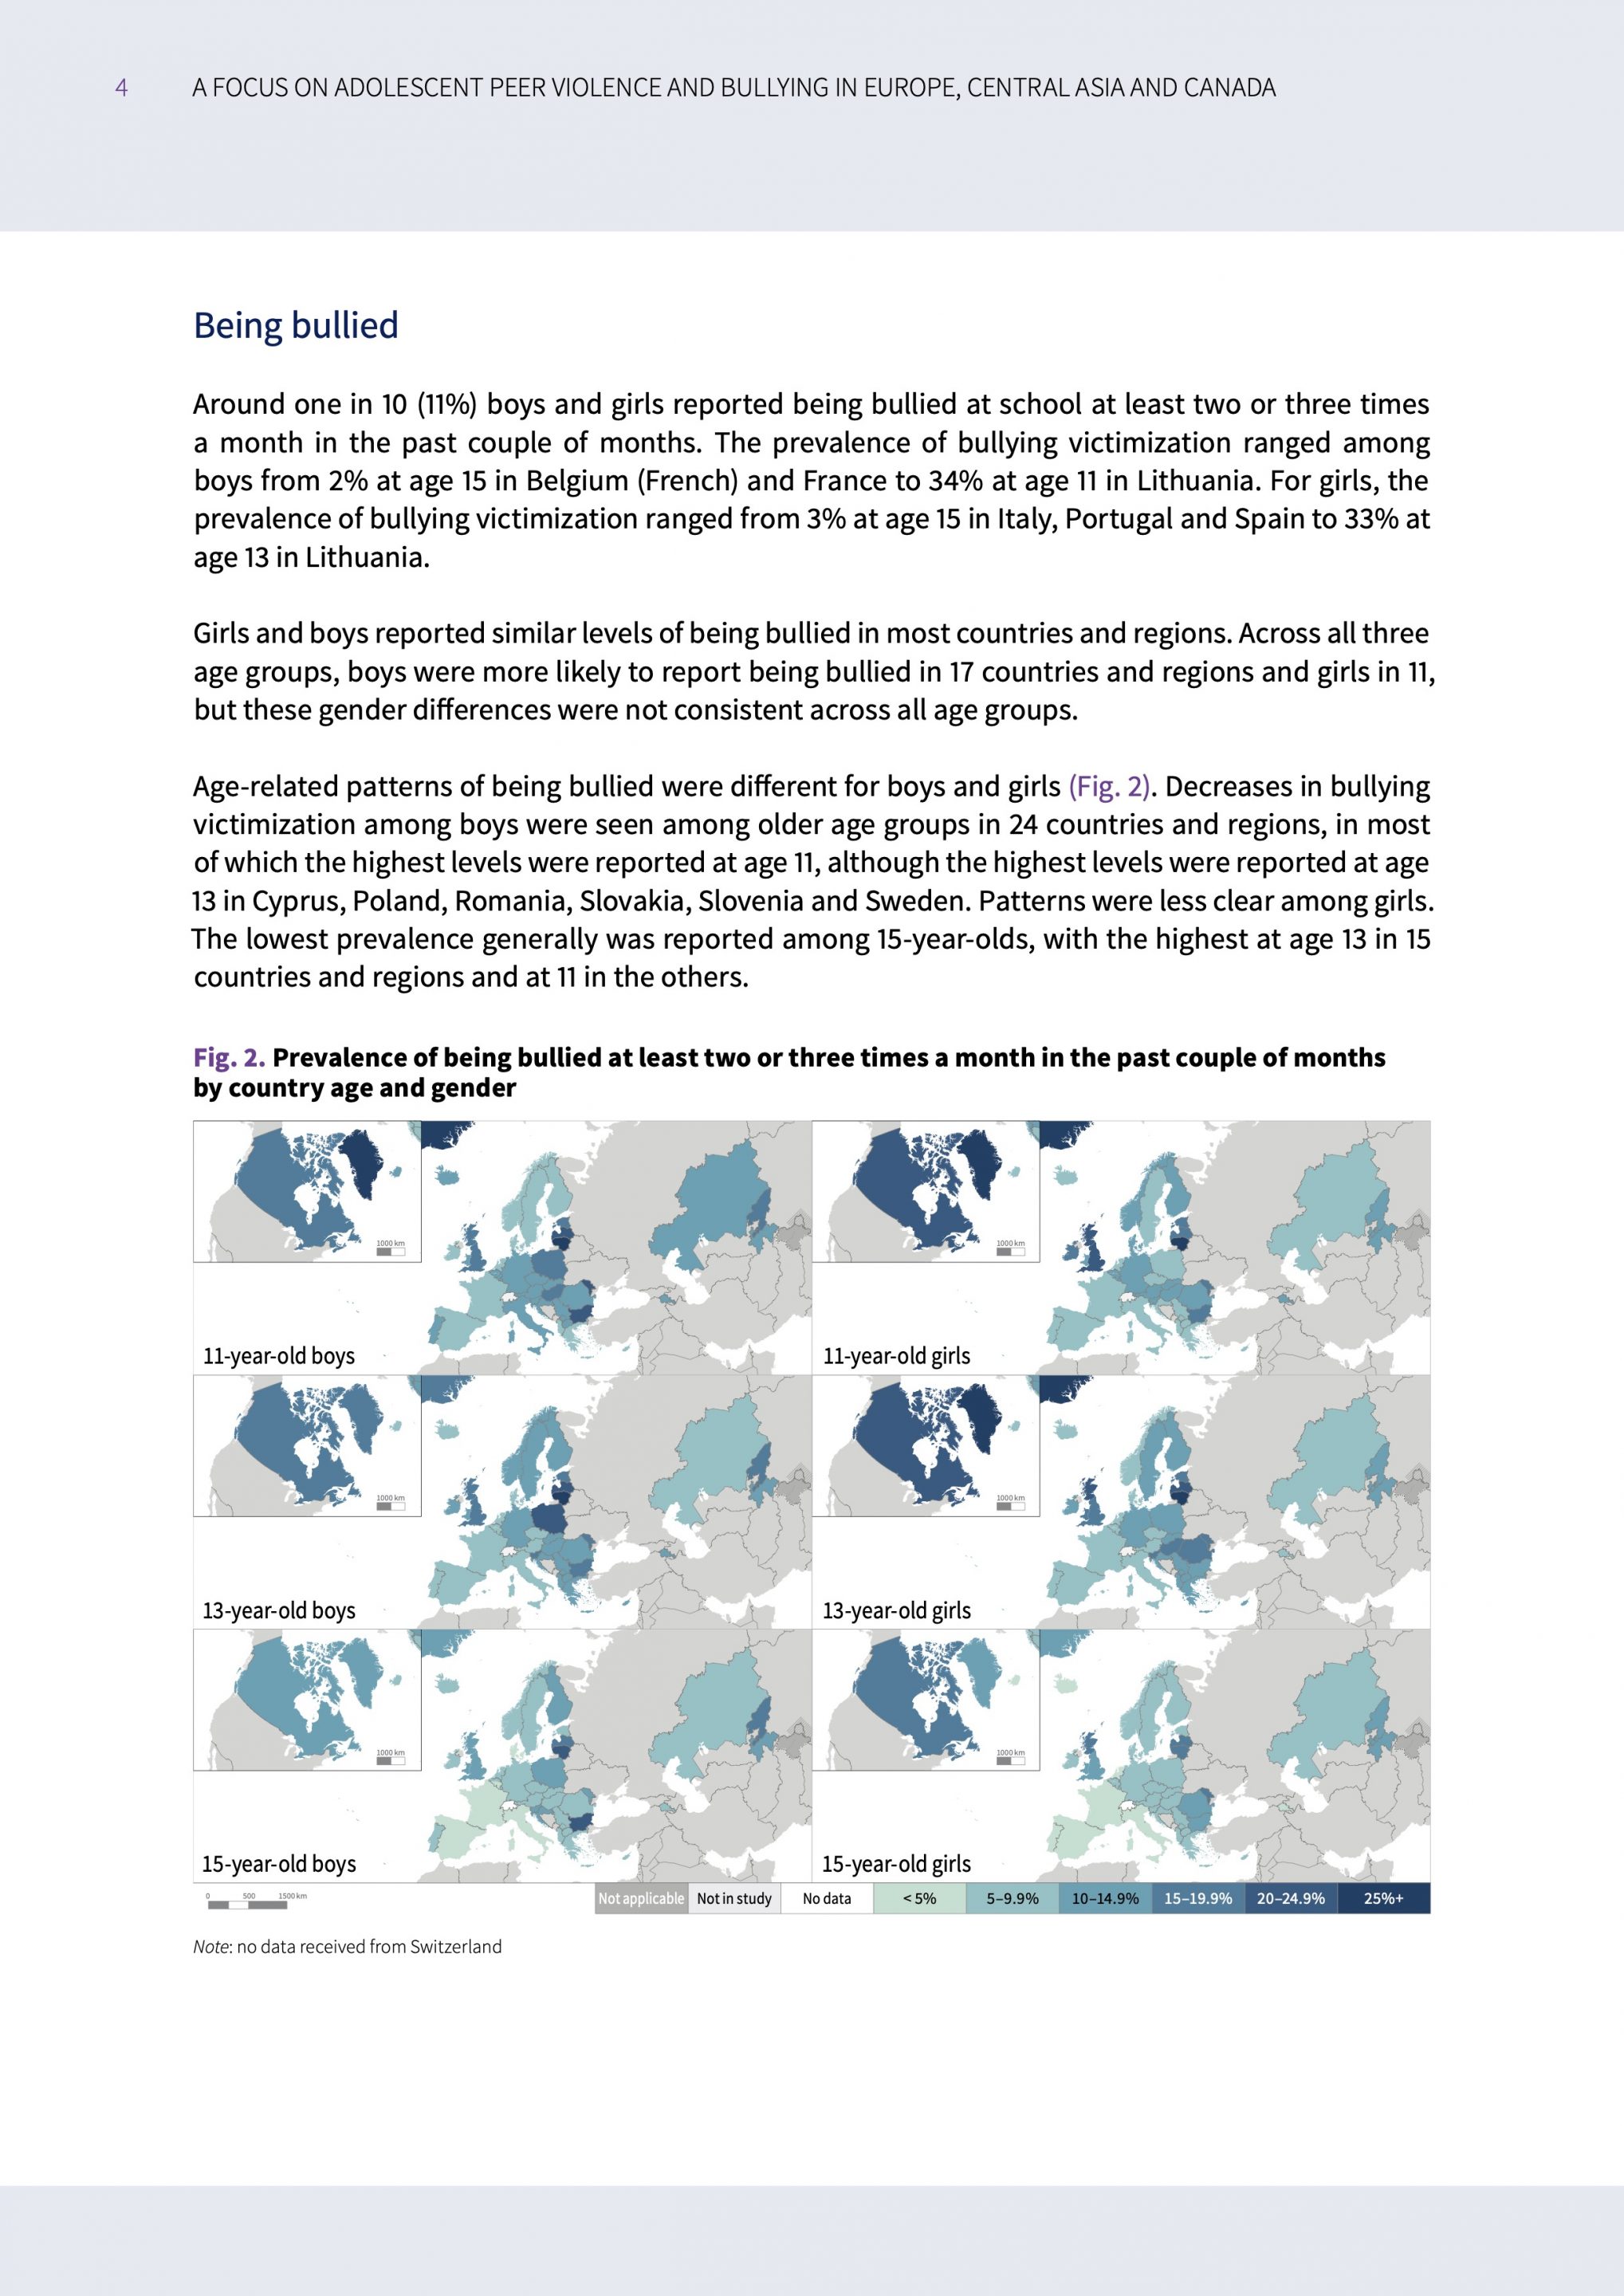 A page from volume 2 report on bullying and violence showing maps